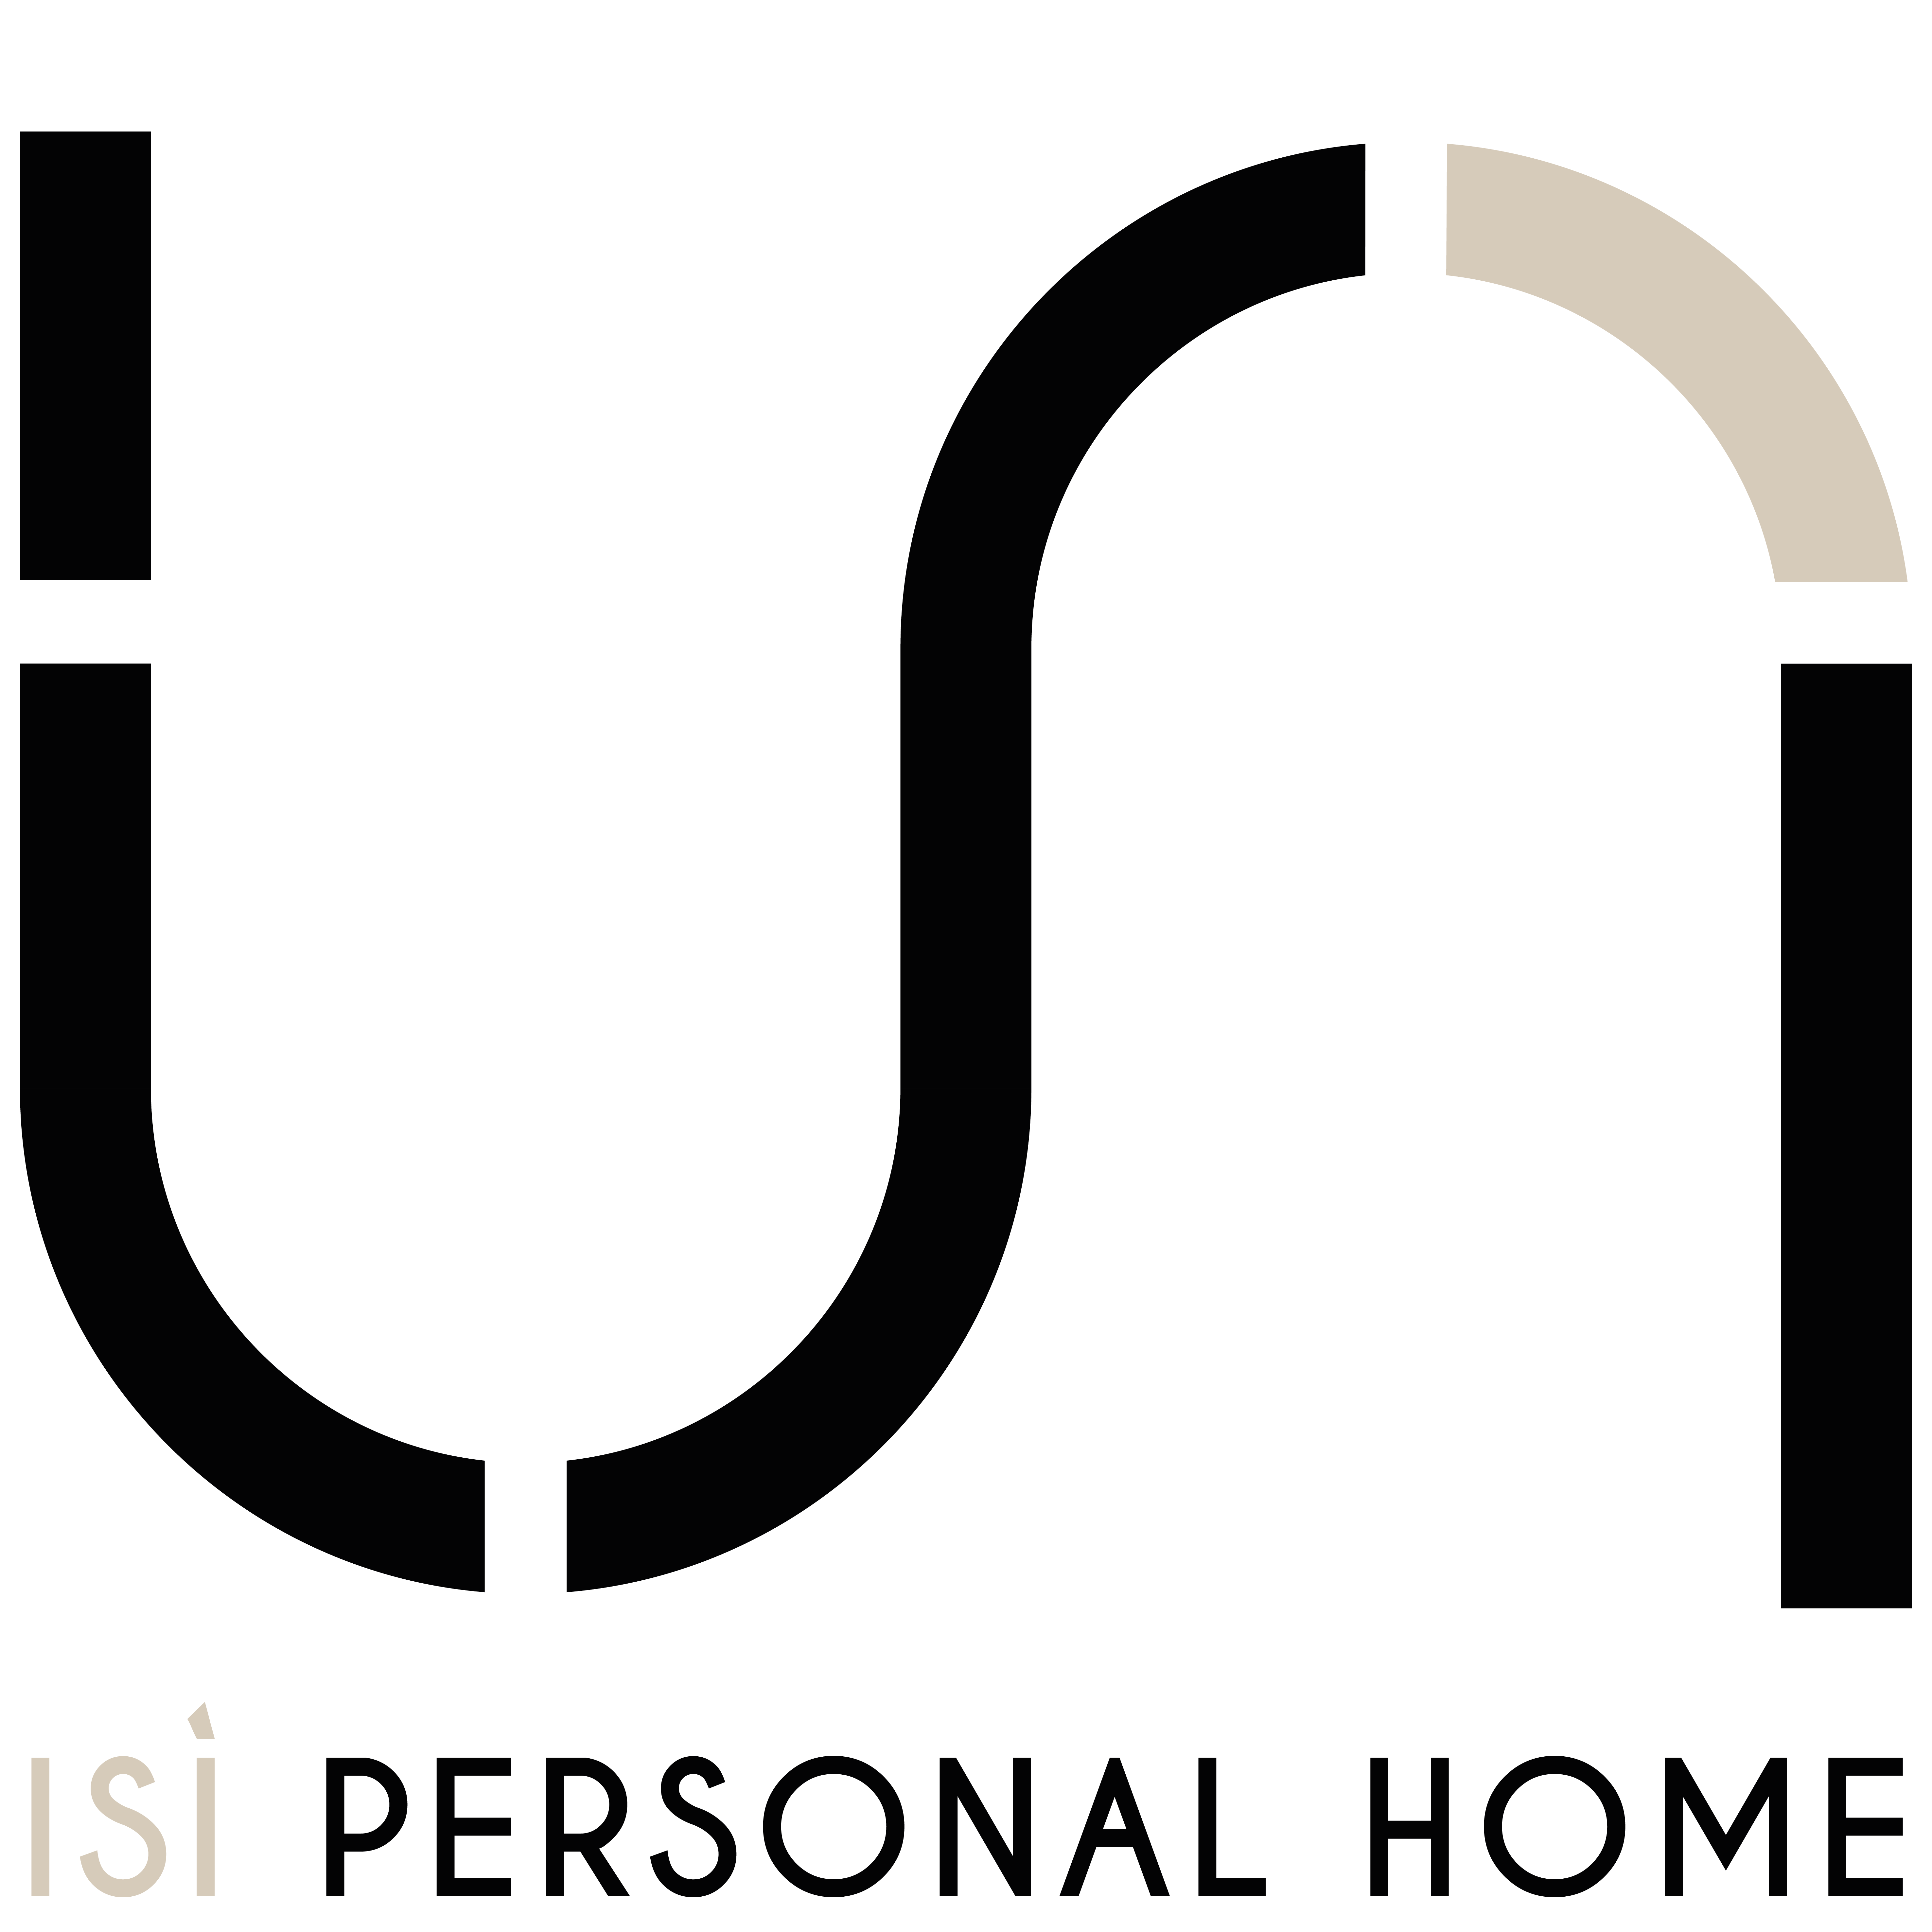 Isì Personal Home